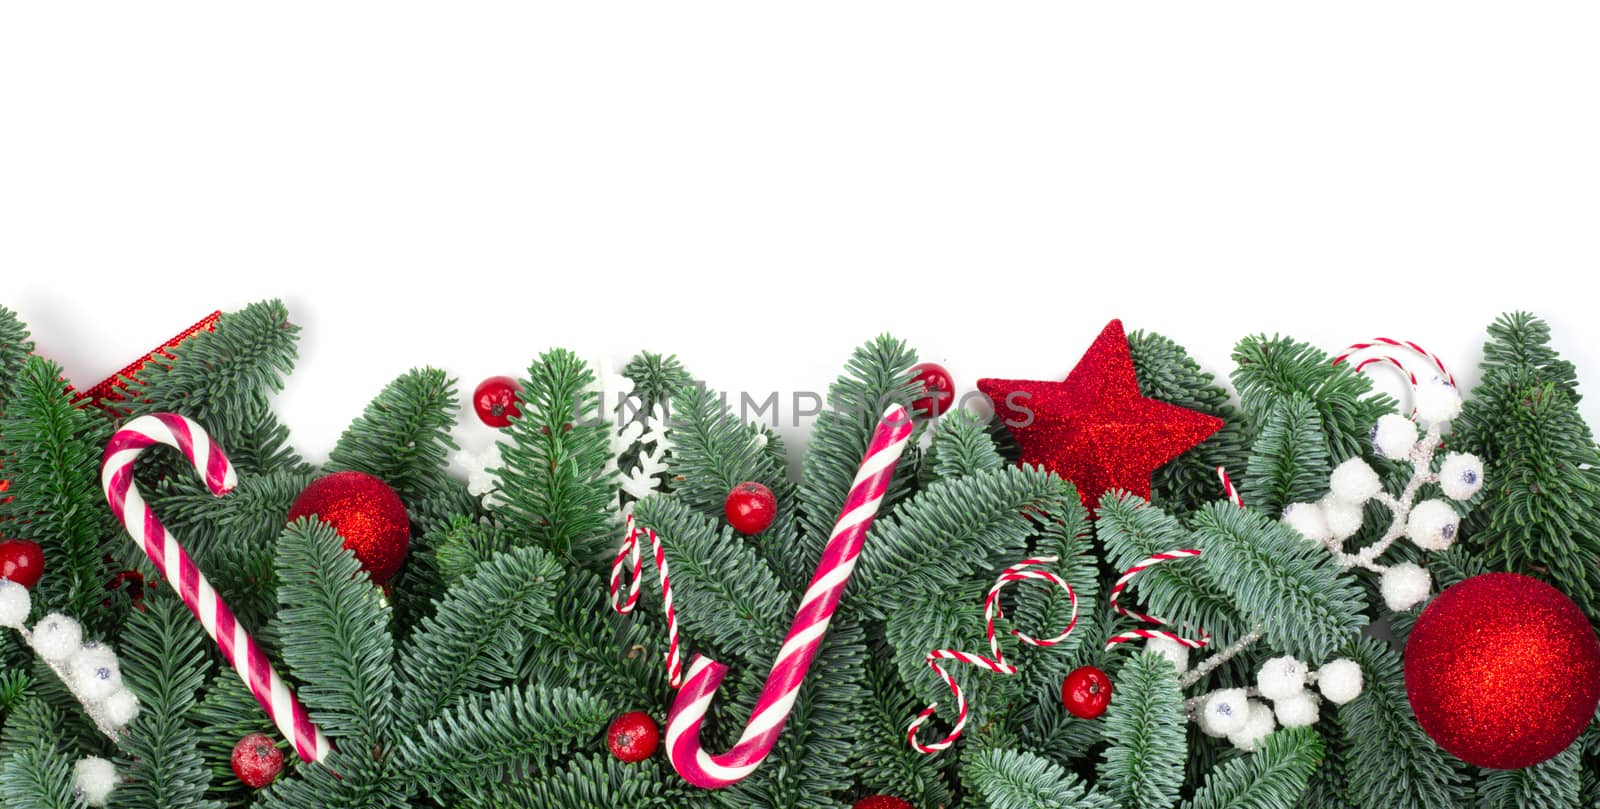 Christmas design boder frame greeting card of noble fir tree branches and baubles isolated on white background